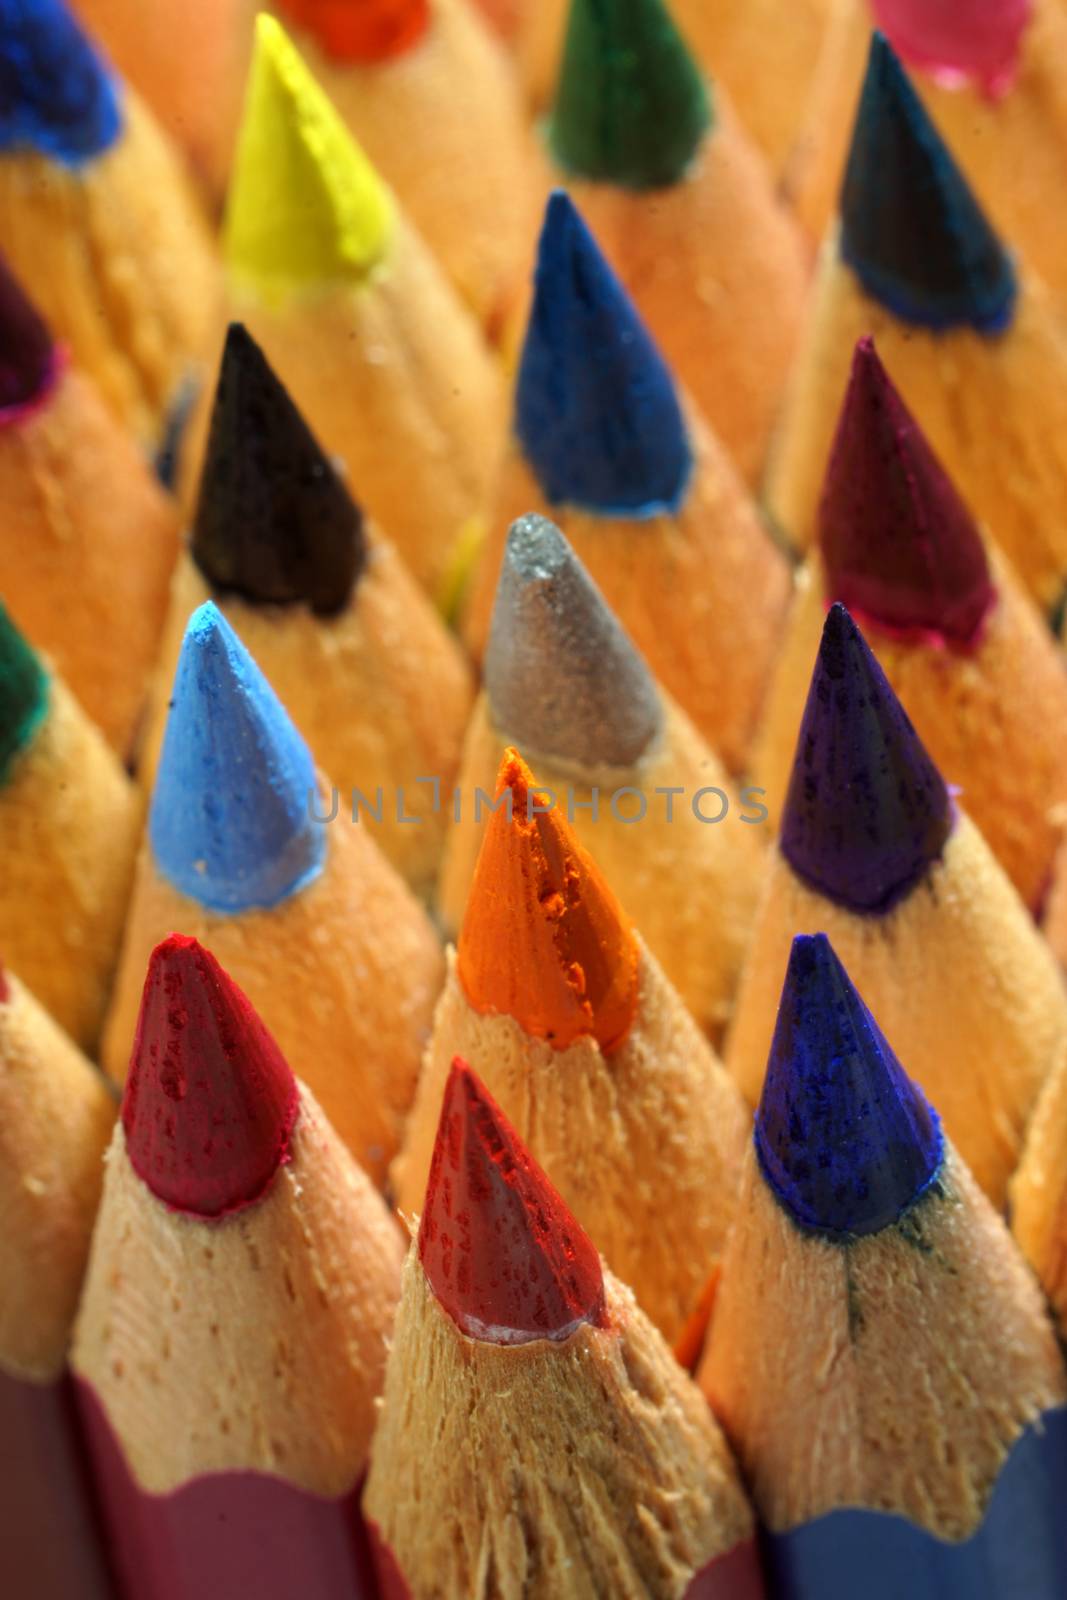 pencils with color shaving by Noppharat_th